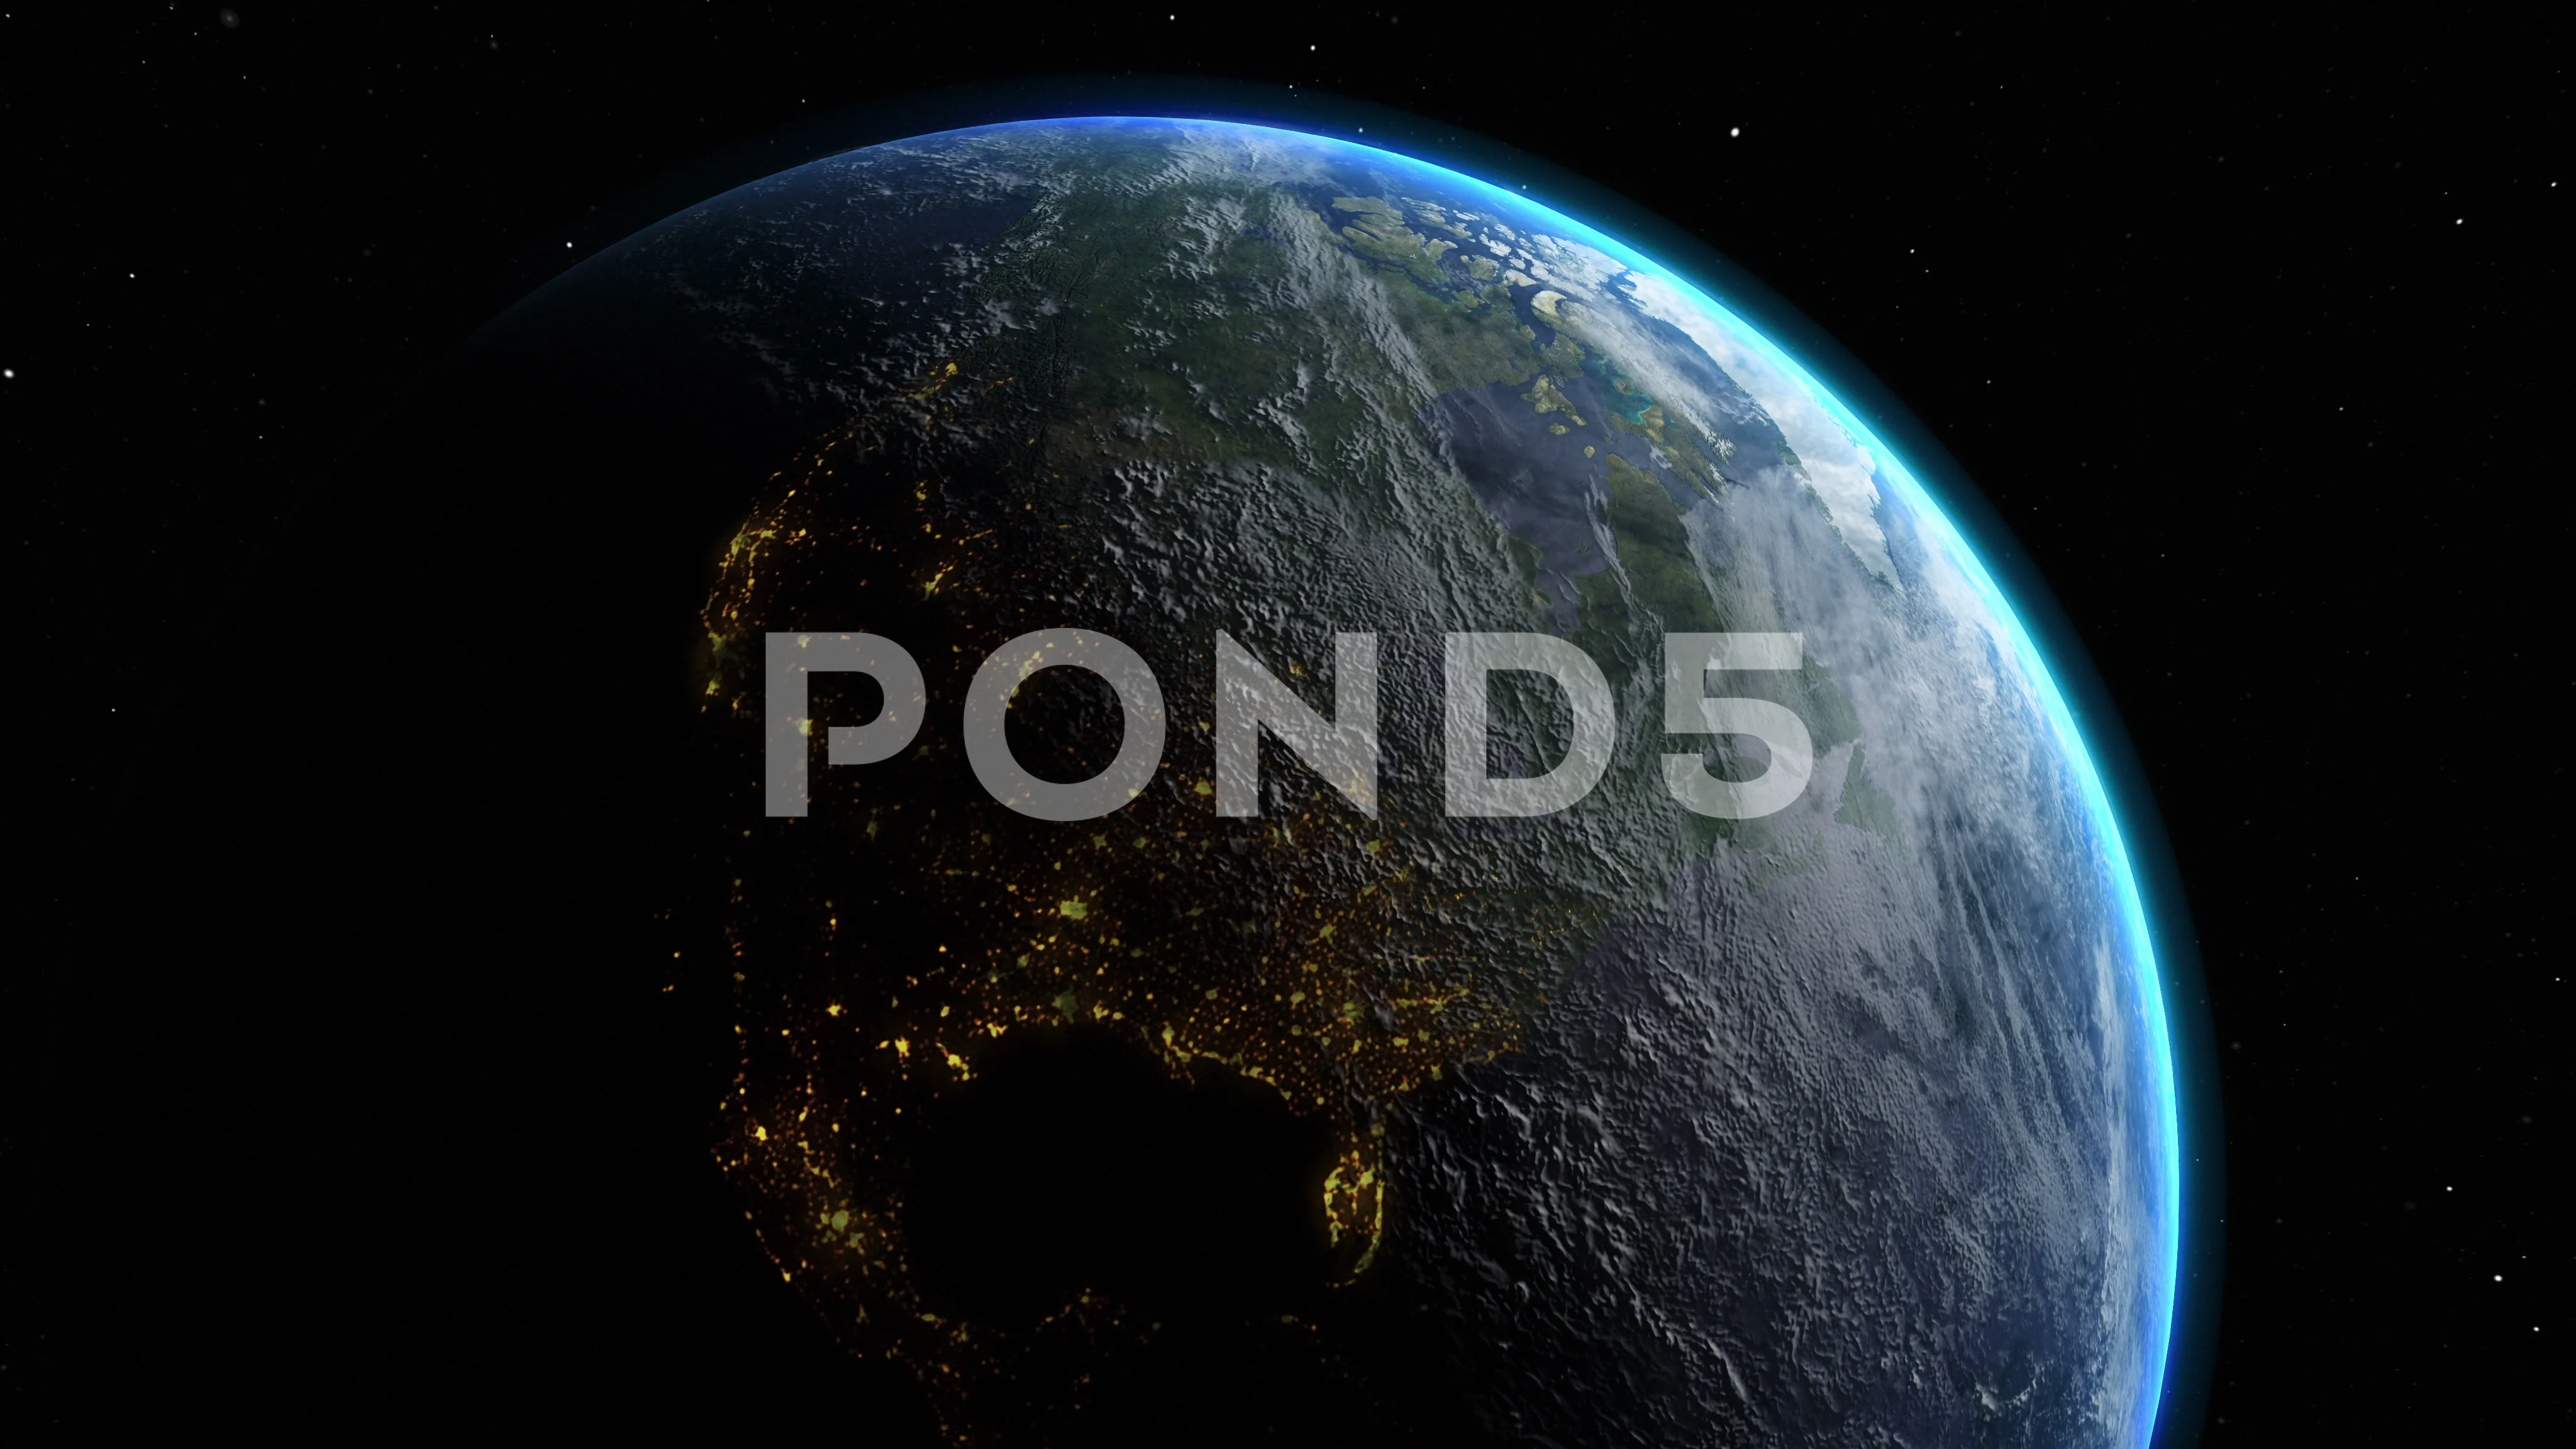 Earth Rotate Space 4K Stock Footage ~ Royalty Free Stock Videos | Pond5